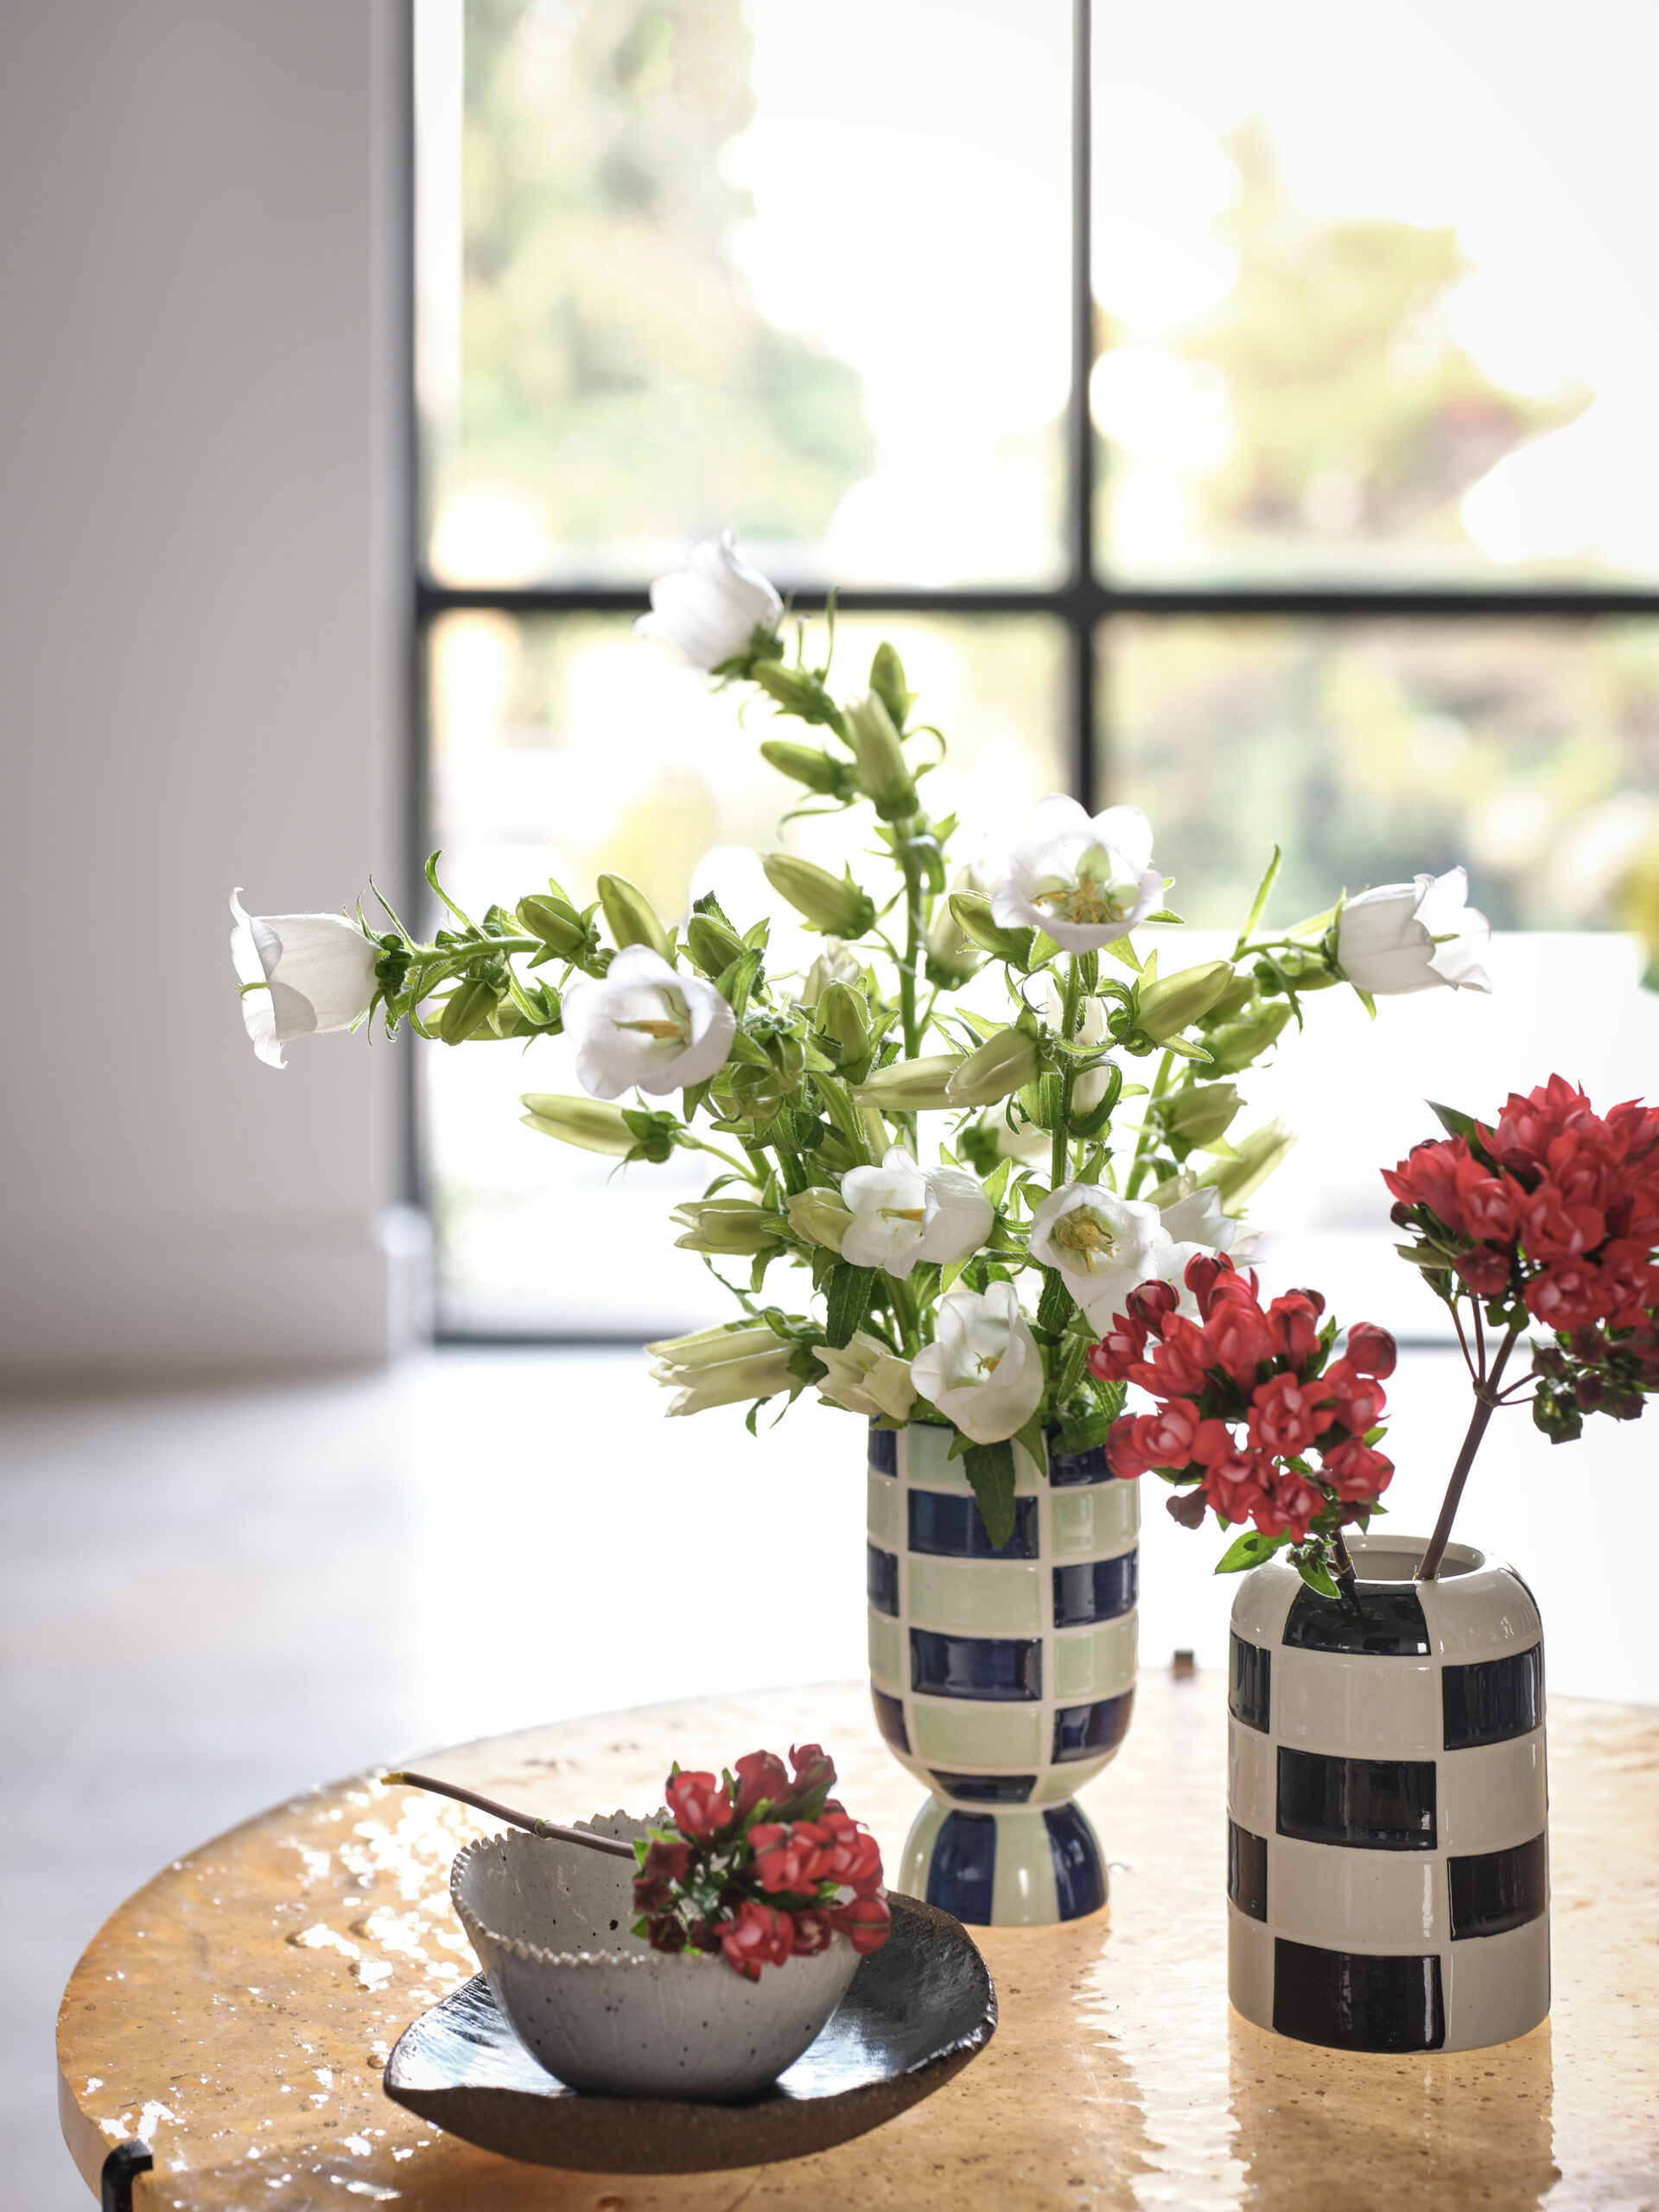 Whether for a special occasion or just because you love blooms, flowers are an easy way to add colour, scent and style into your space. Check out these 9 flower styling ideas are amongst the prettiest you'll have seen by Interior Stylist Maxine Brady. chequered board vase